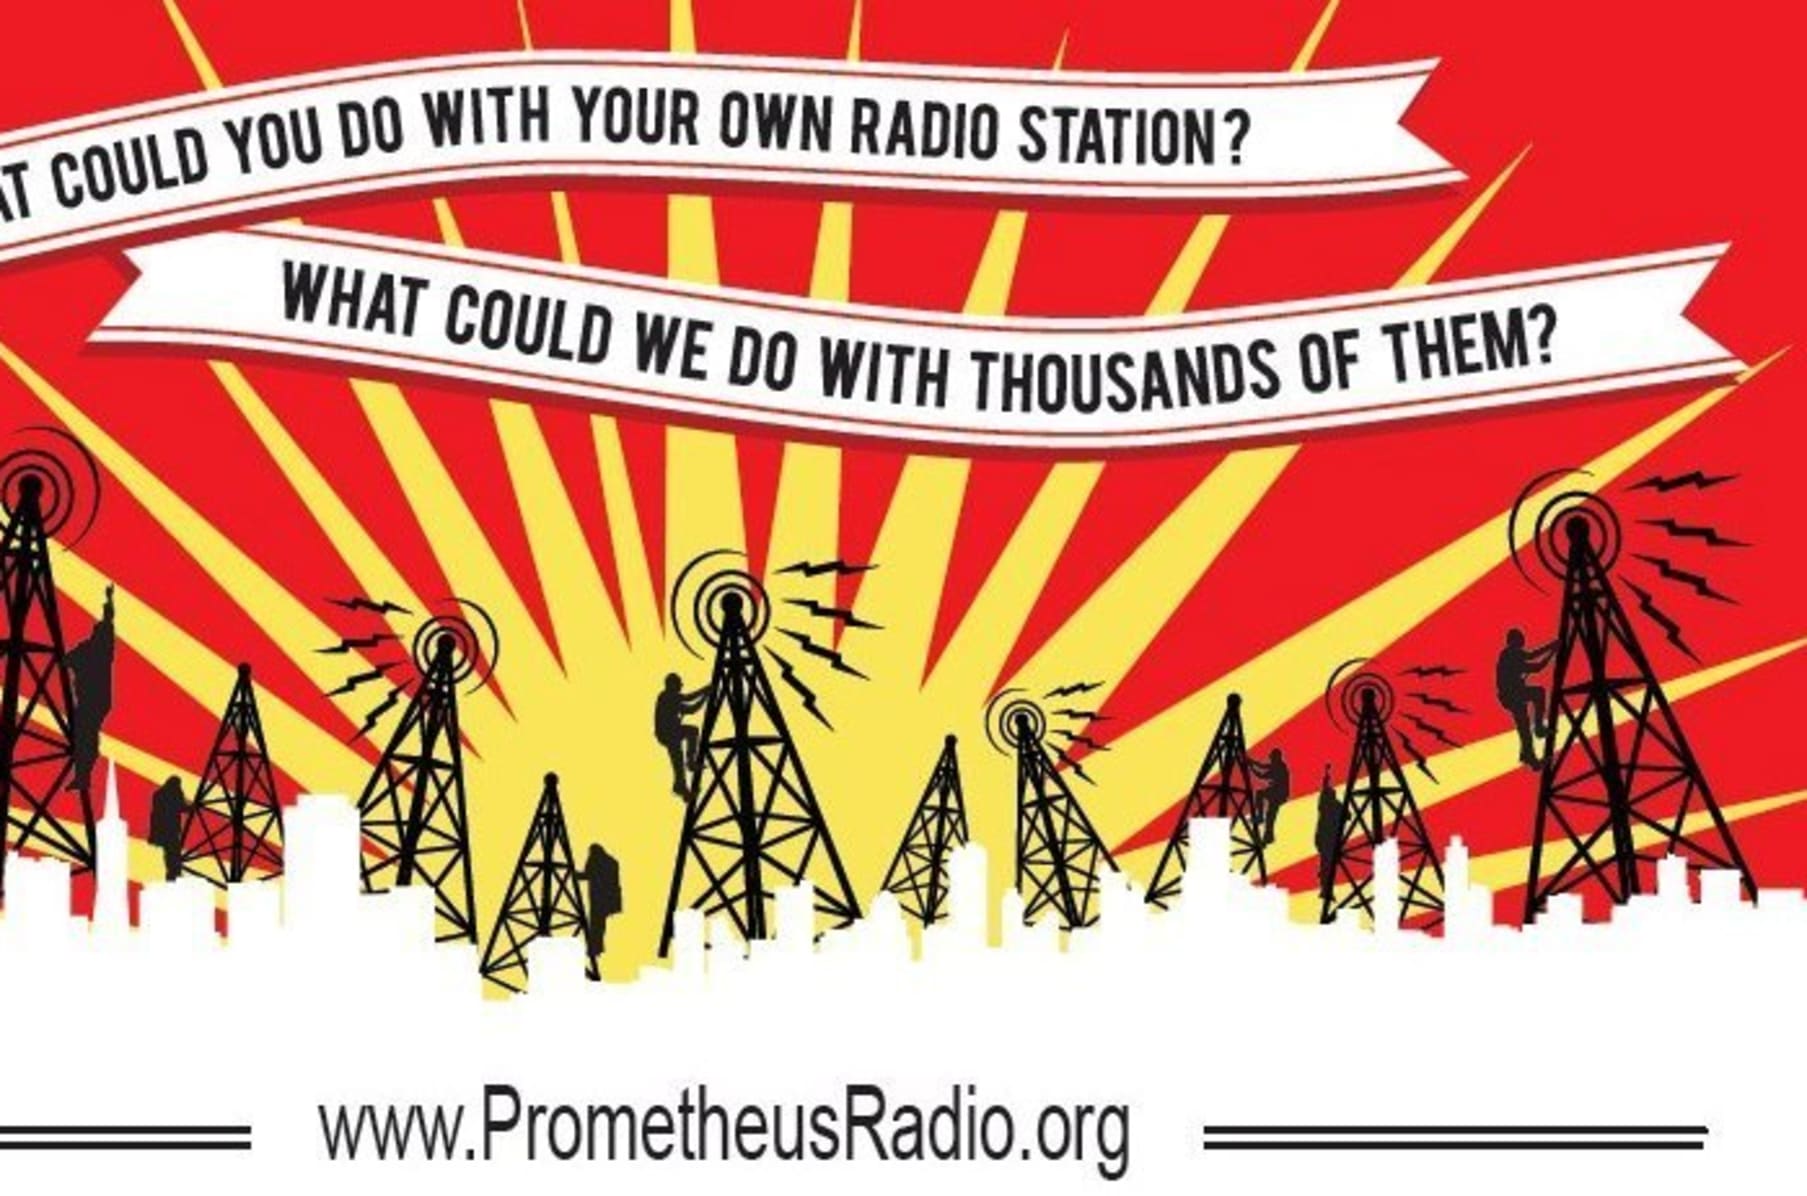 Perversion Discover Strong wind The Prometheus Radio Project & The Next Wave of Community Radio! | Indiegogo